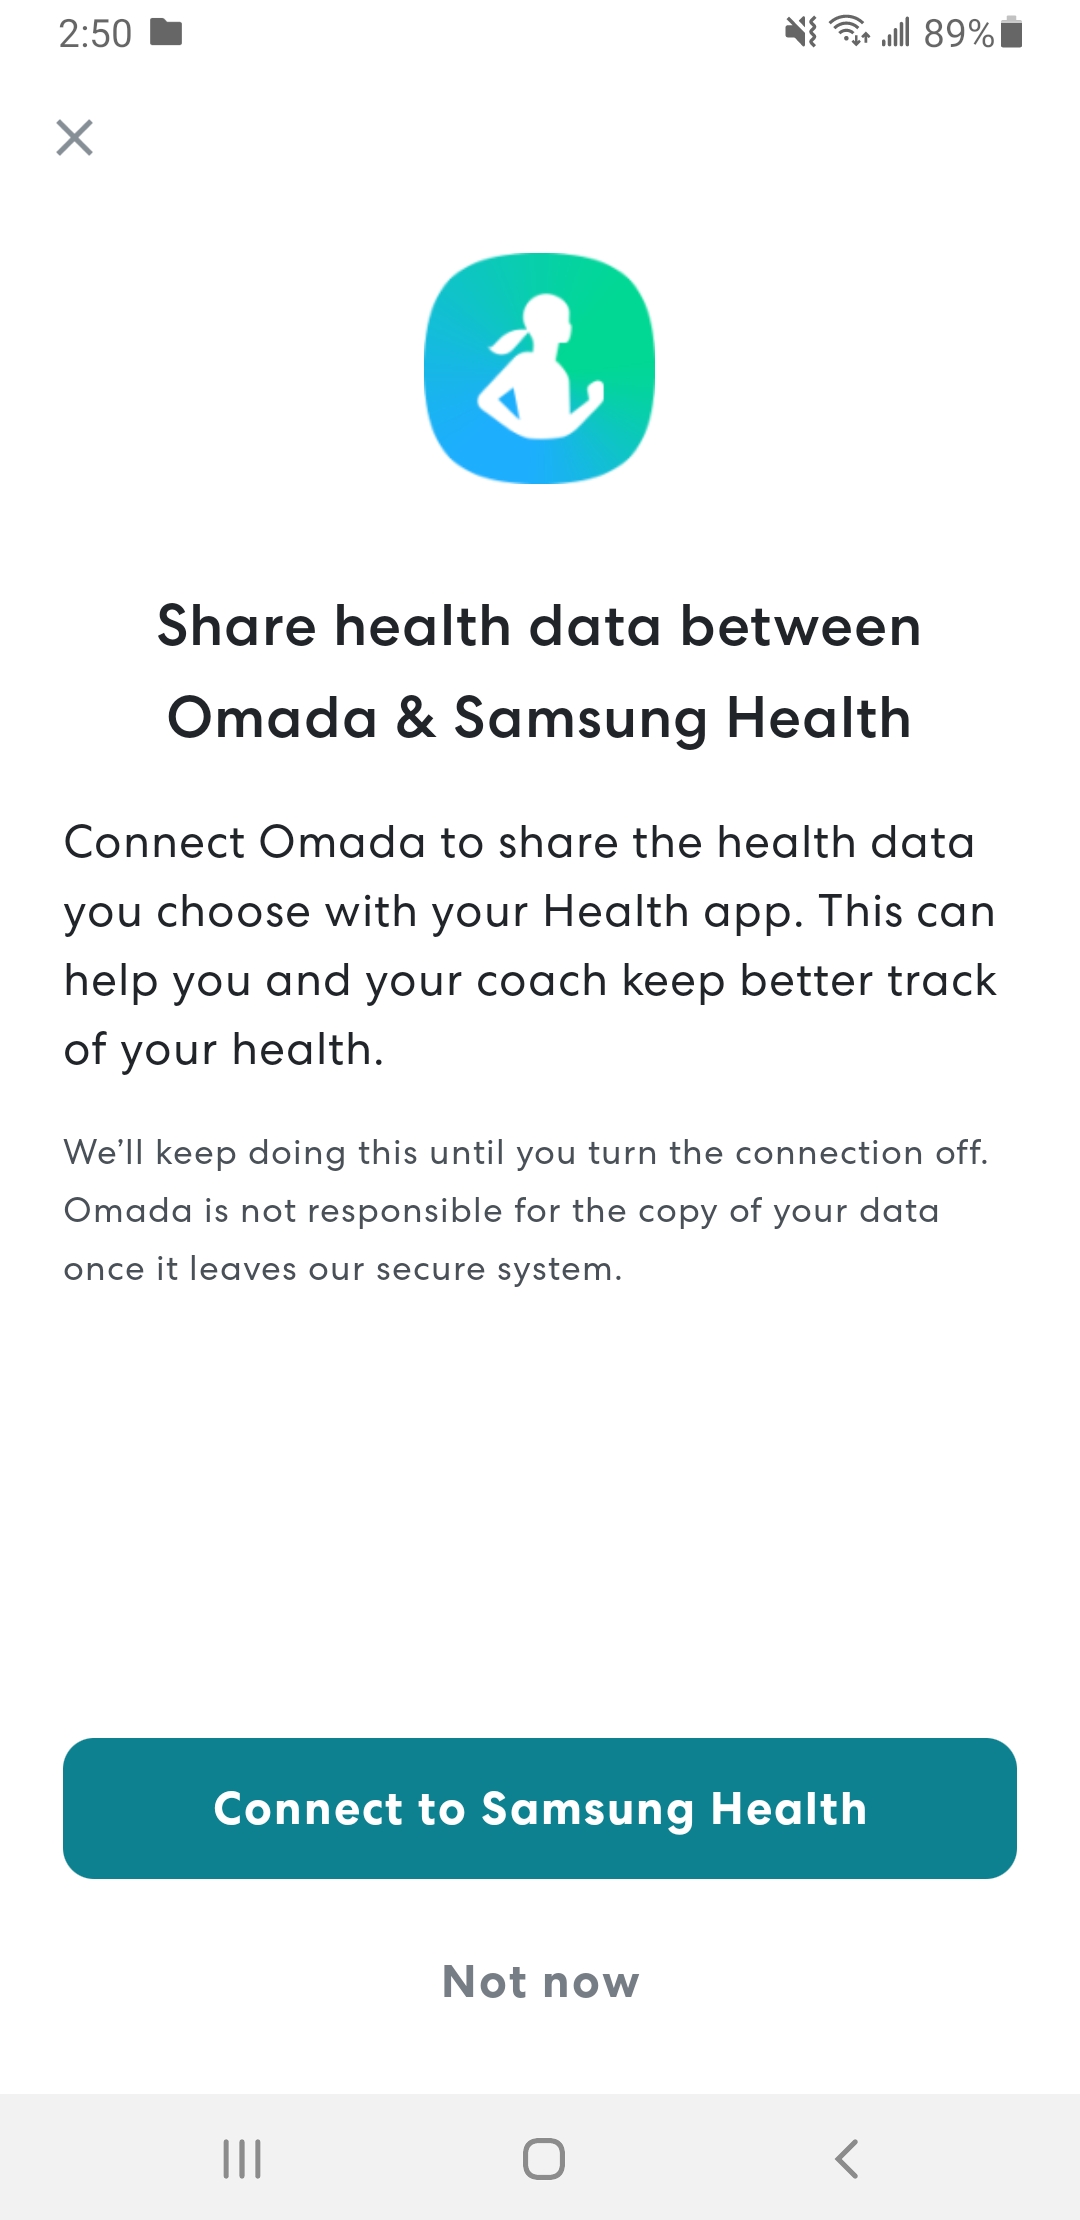 How can I transfer my scale data from my Omada app to GoogleFit or